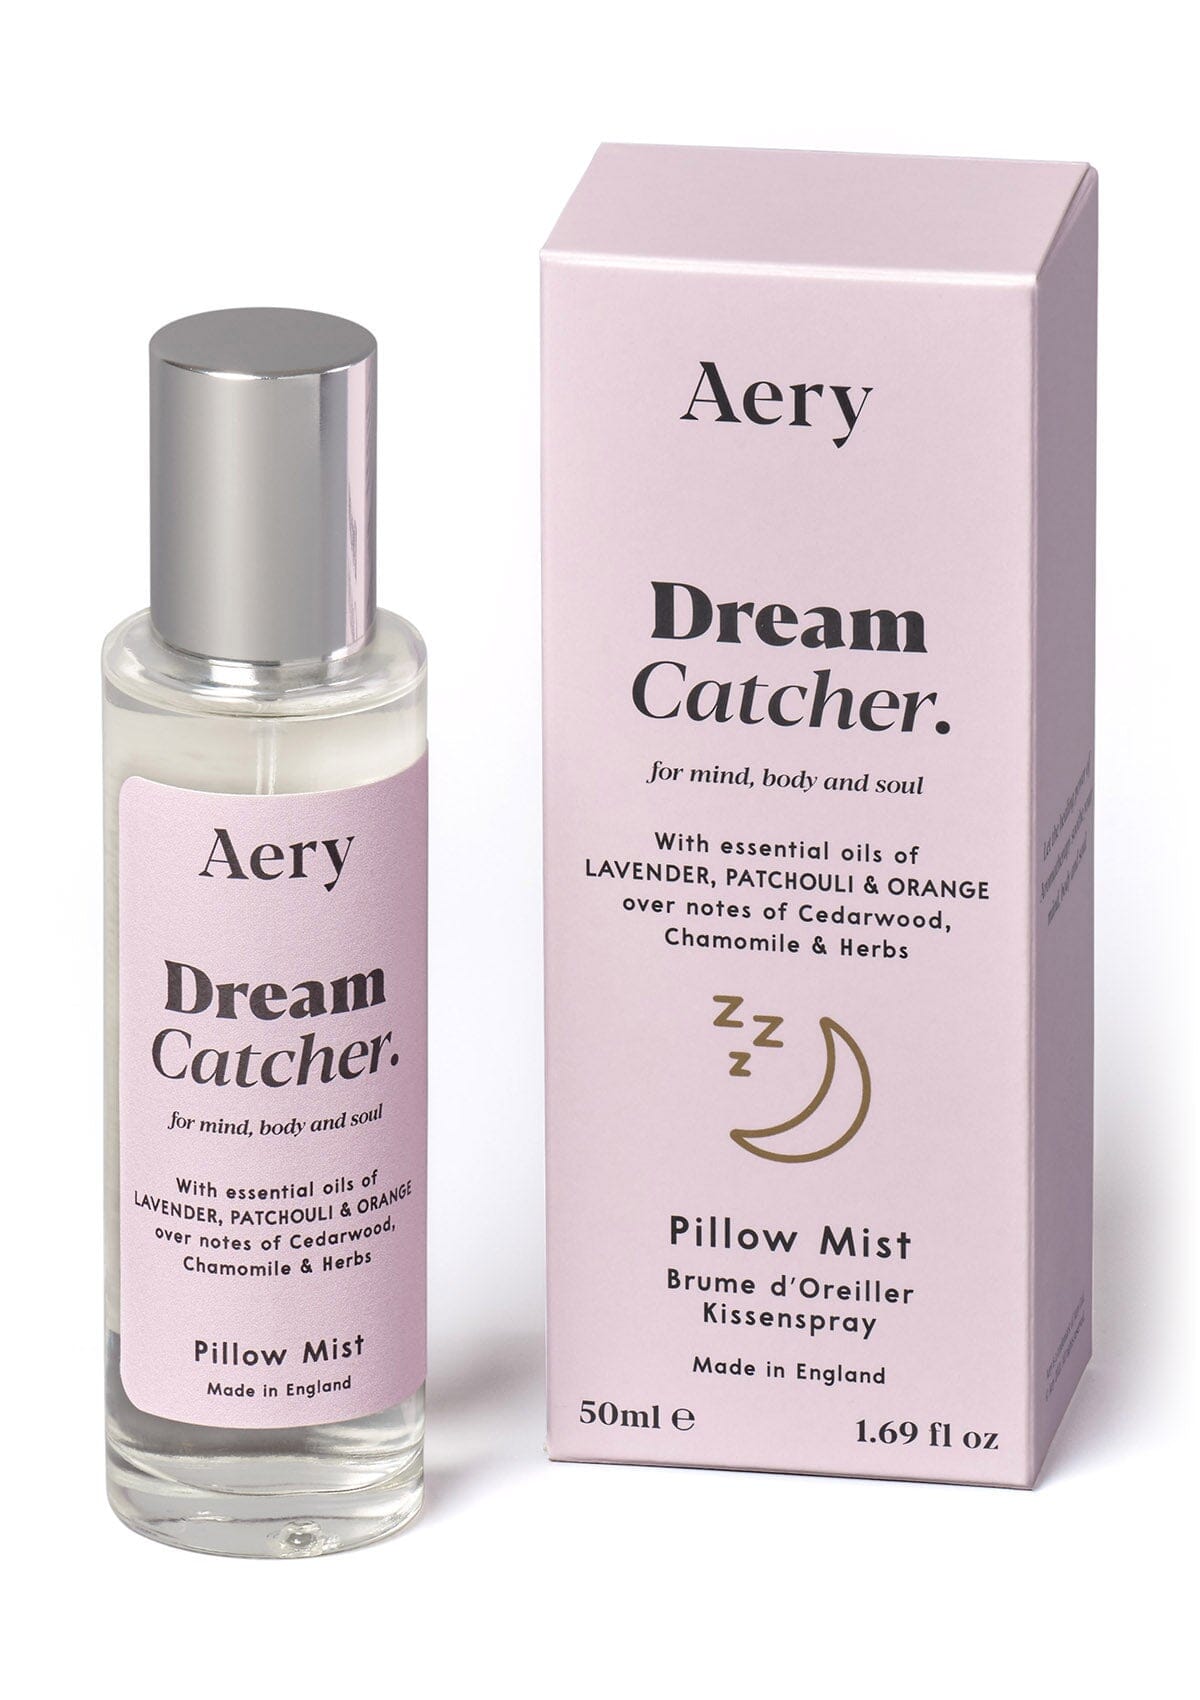 Lilac Dream Catcher pillow spray displayed next to product packaging by Aery on white background 